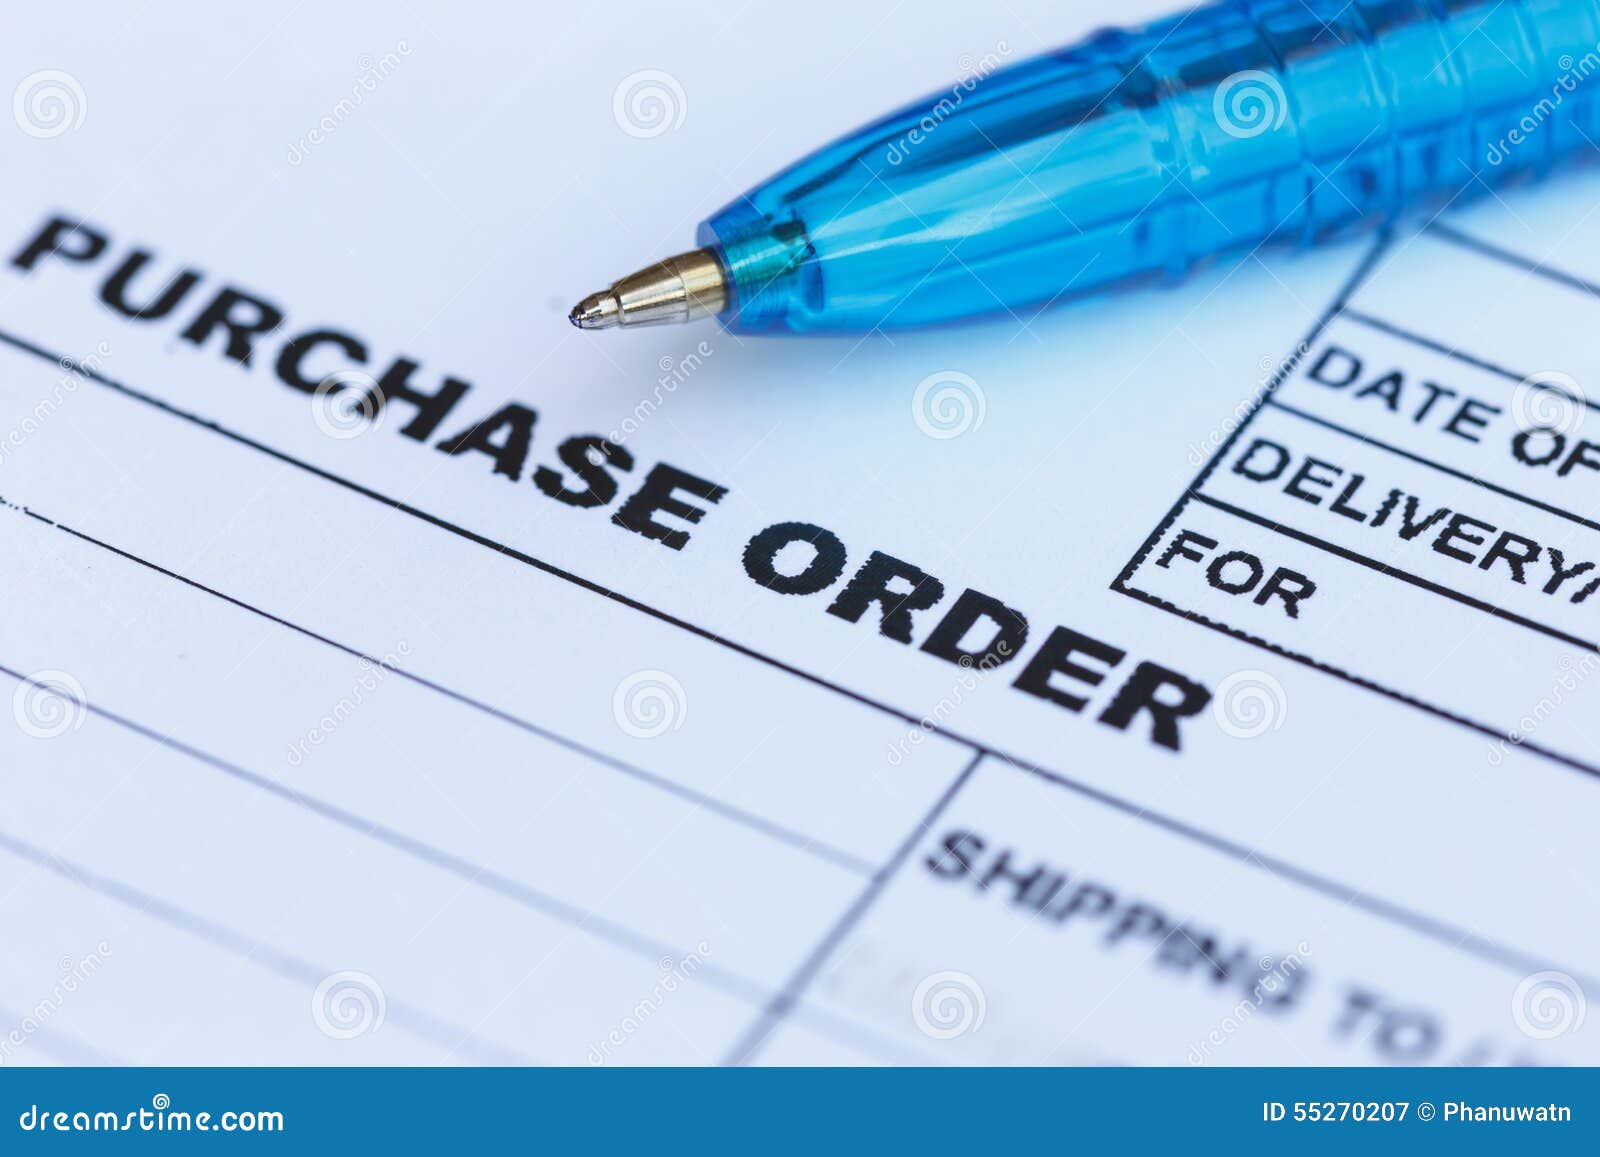 purchase order with blue pen in the officeÃ¢â¬Â